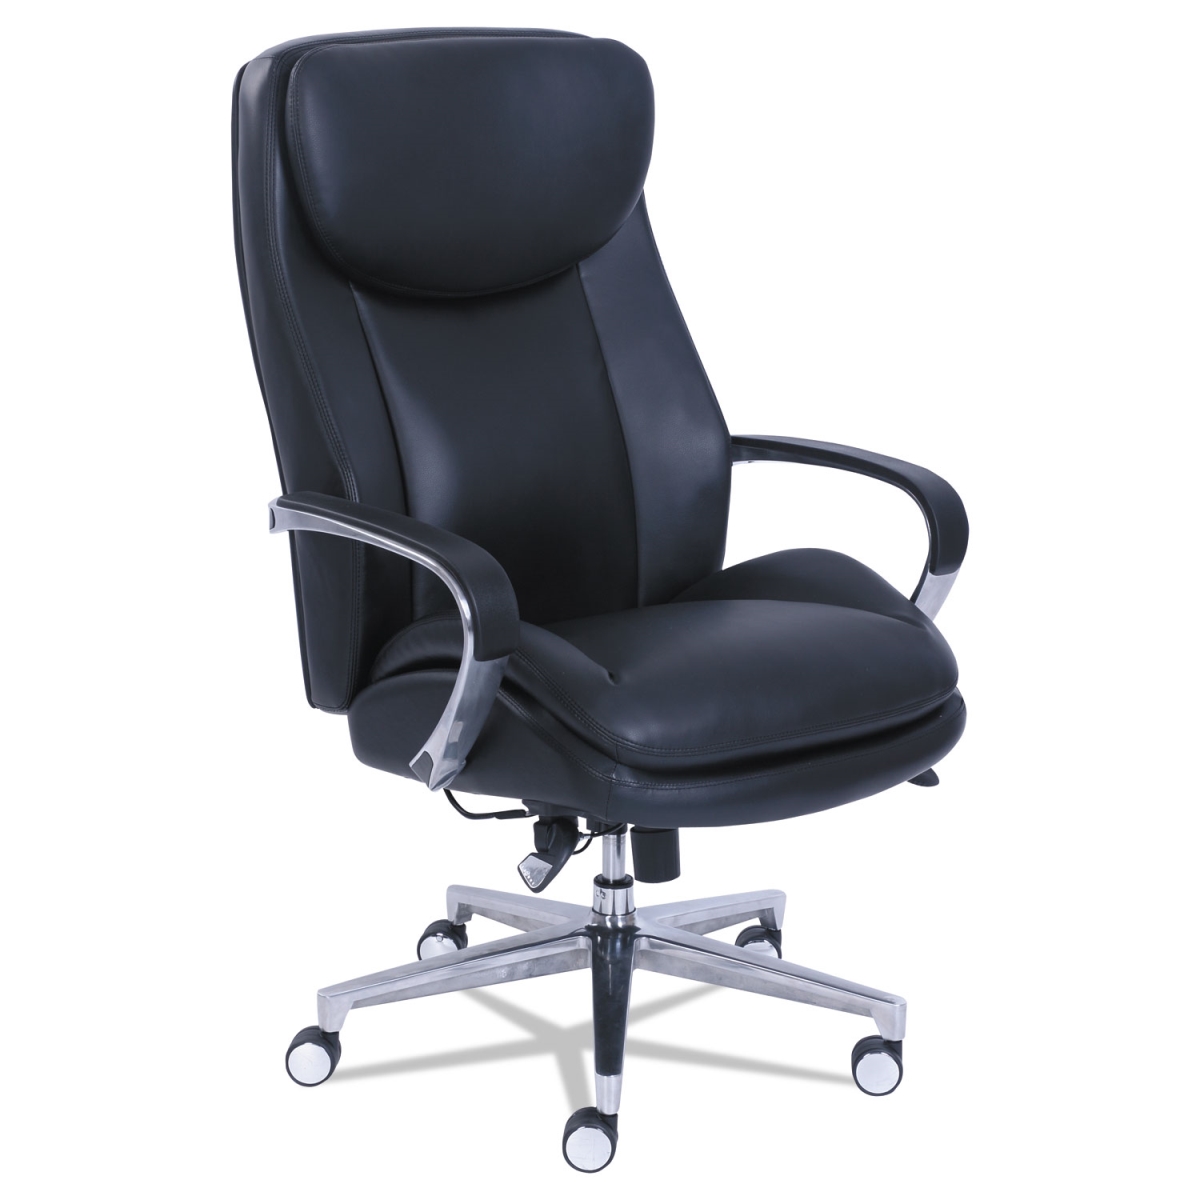 Lzb48956 2000 Big &tall Executive Chair With Dynamic Lumbar Support, Black